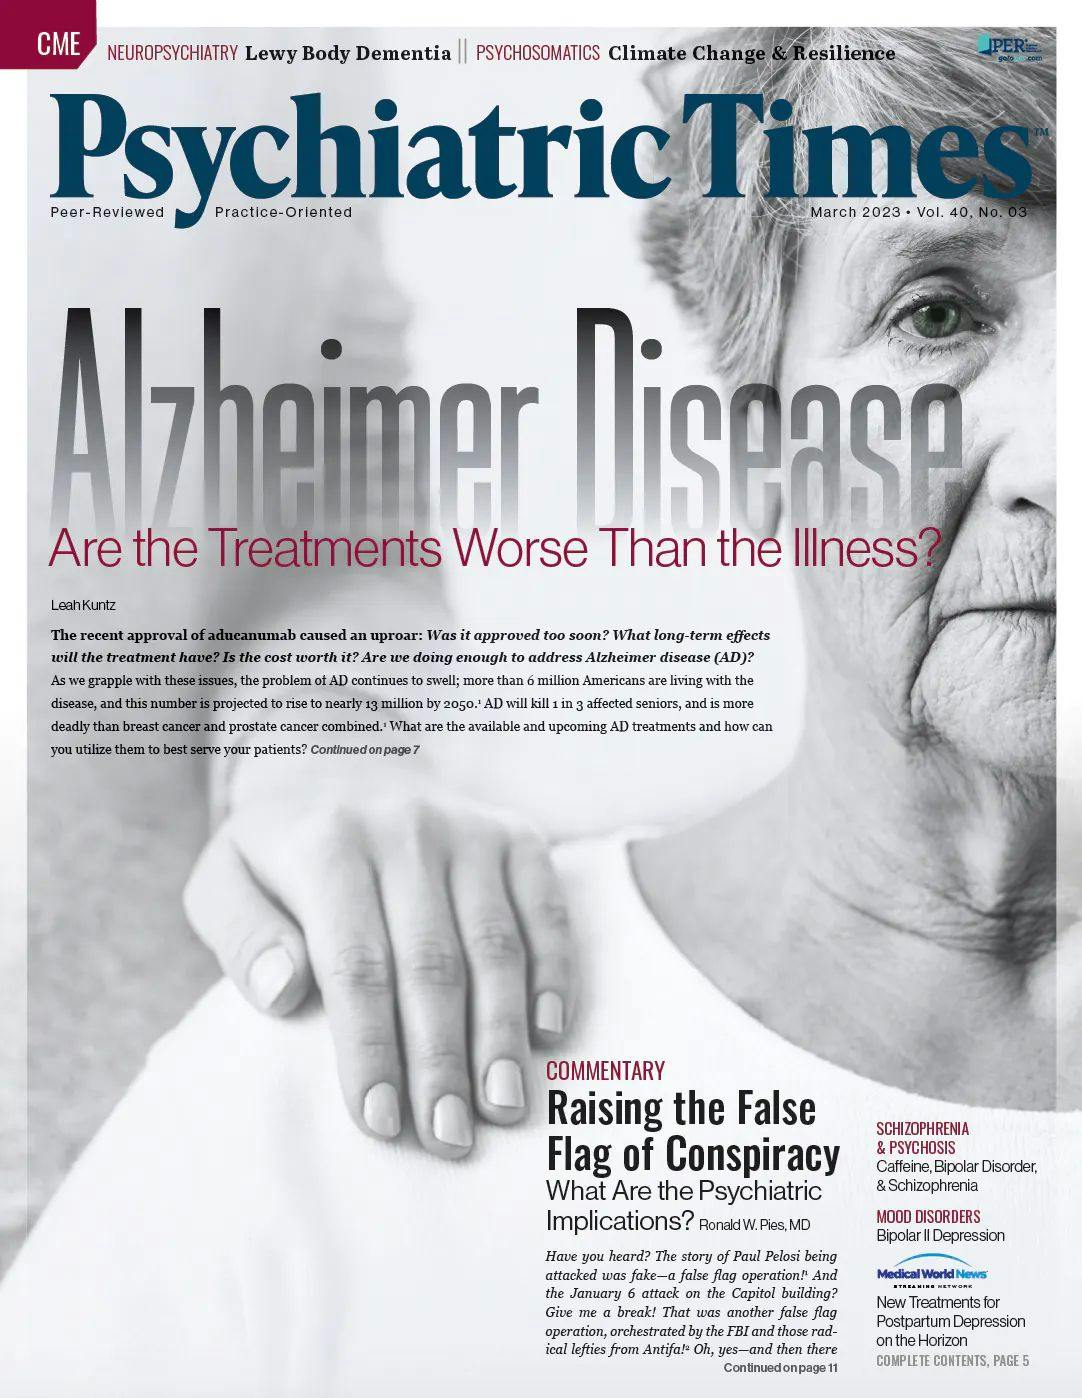 The experts weighed in on a wide variety of psychiatric issues for the March 2023 issue of Psychiatric Times.